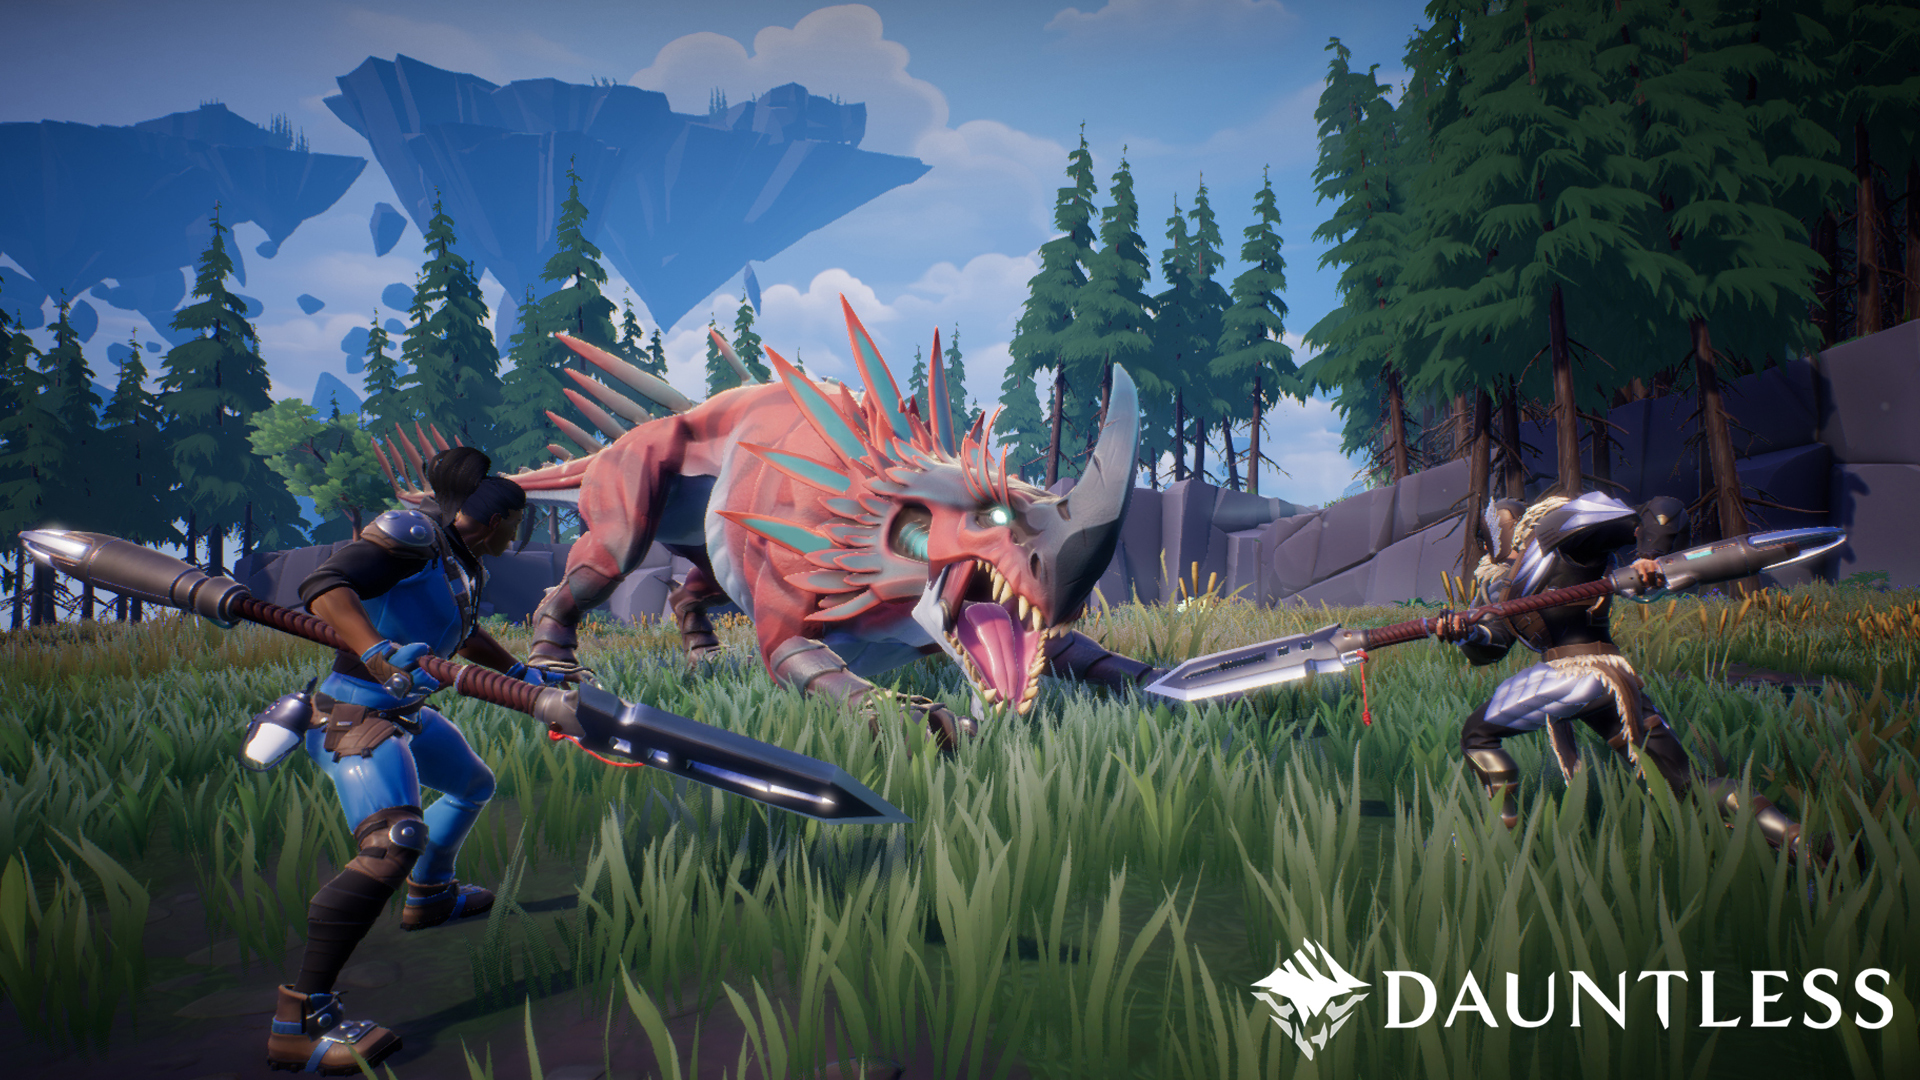 Dauntless Developer Announces Two New Studios and New Games in Development